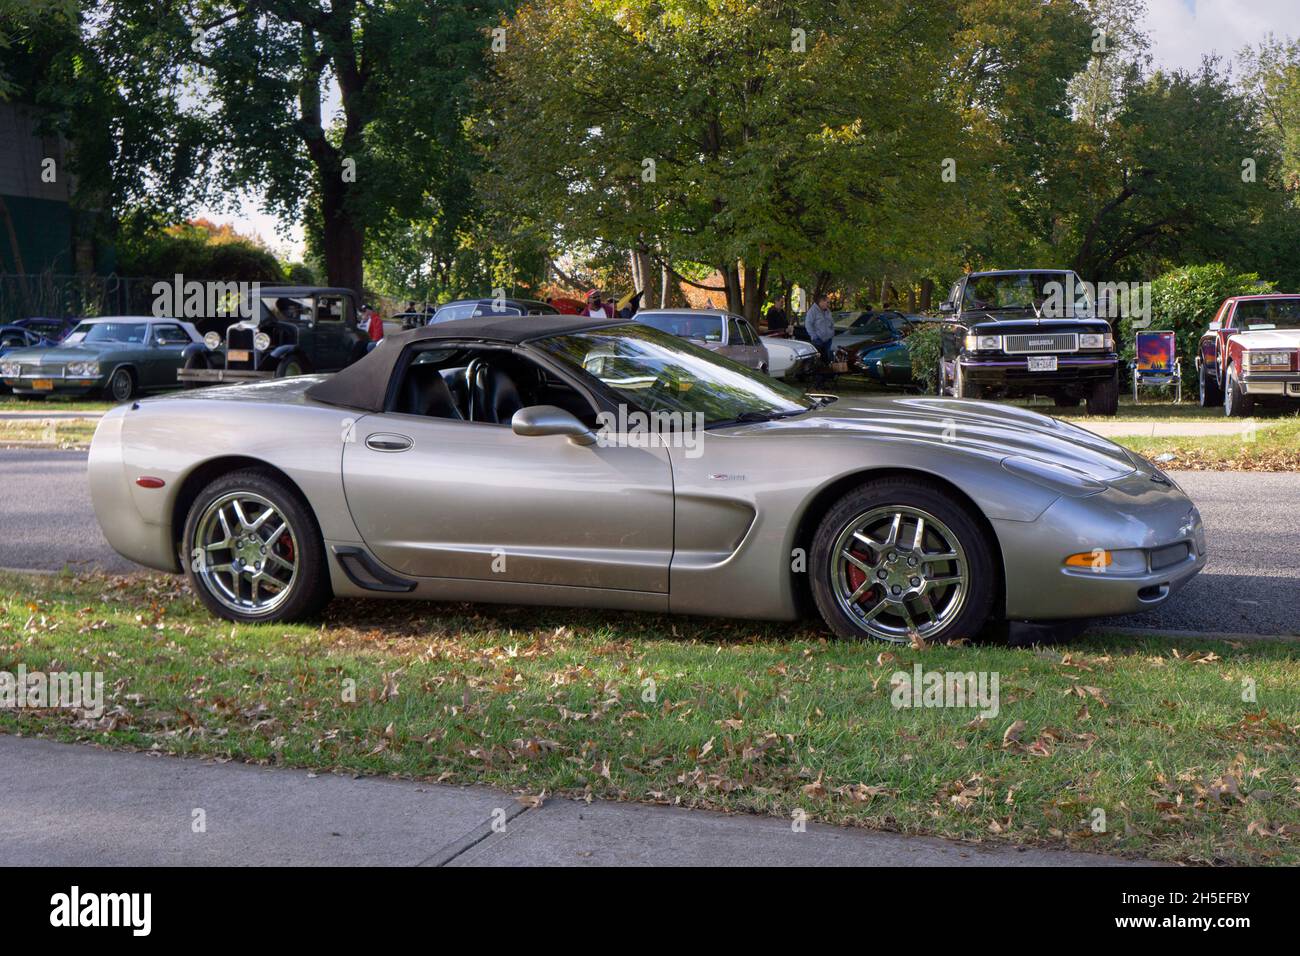 A silver 2002 Corvette convertible parked outside the Bayside Historical Society in Queens at a vintage car show. Stock Photo